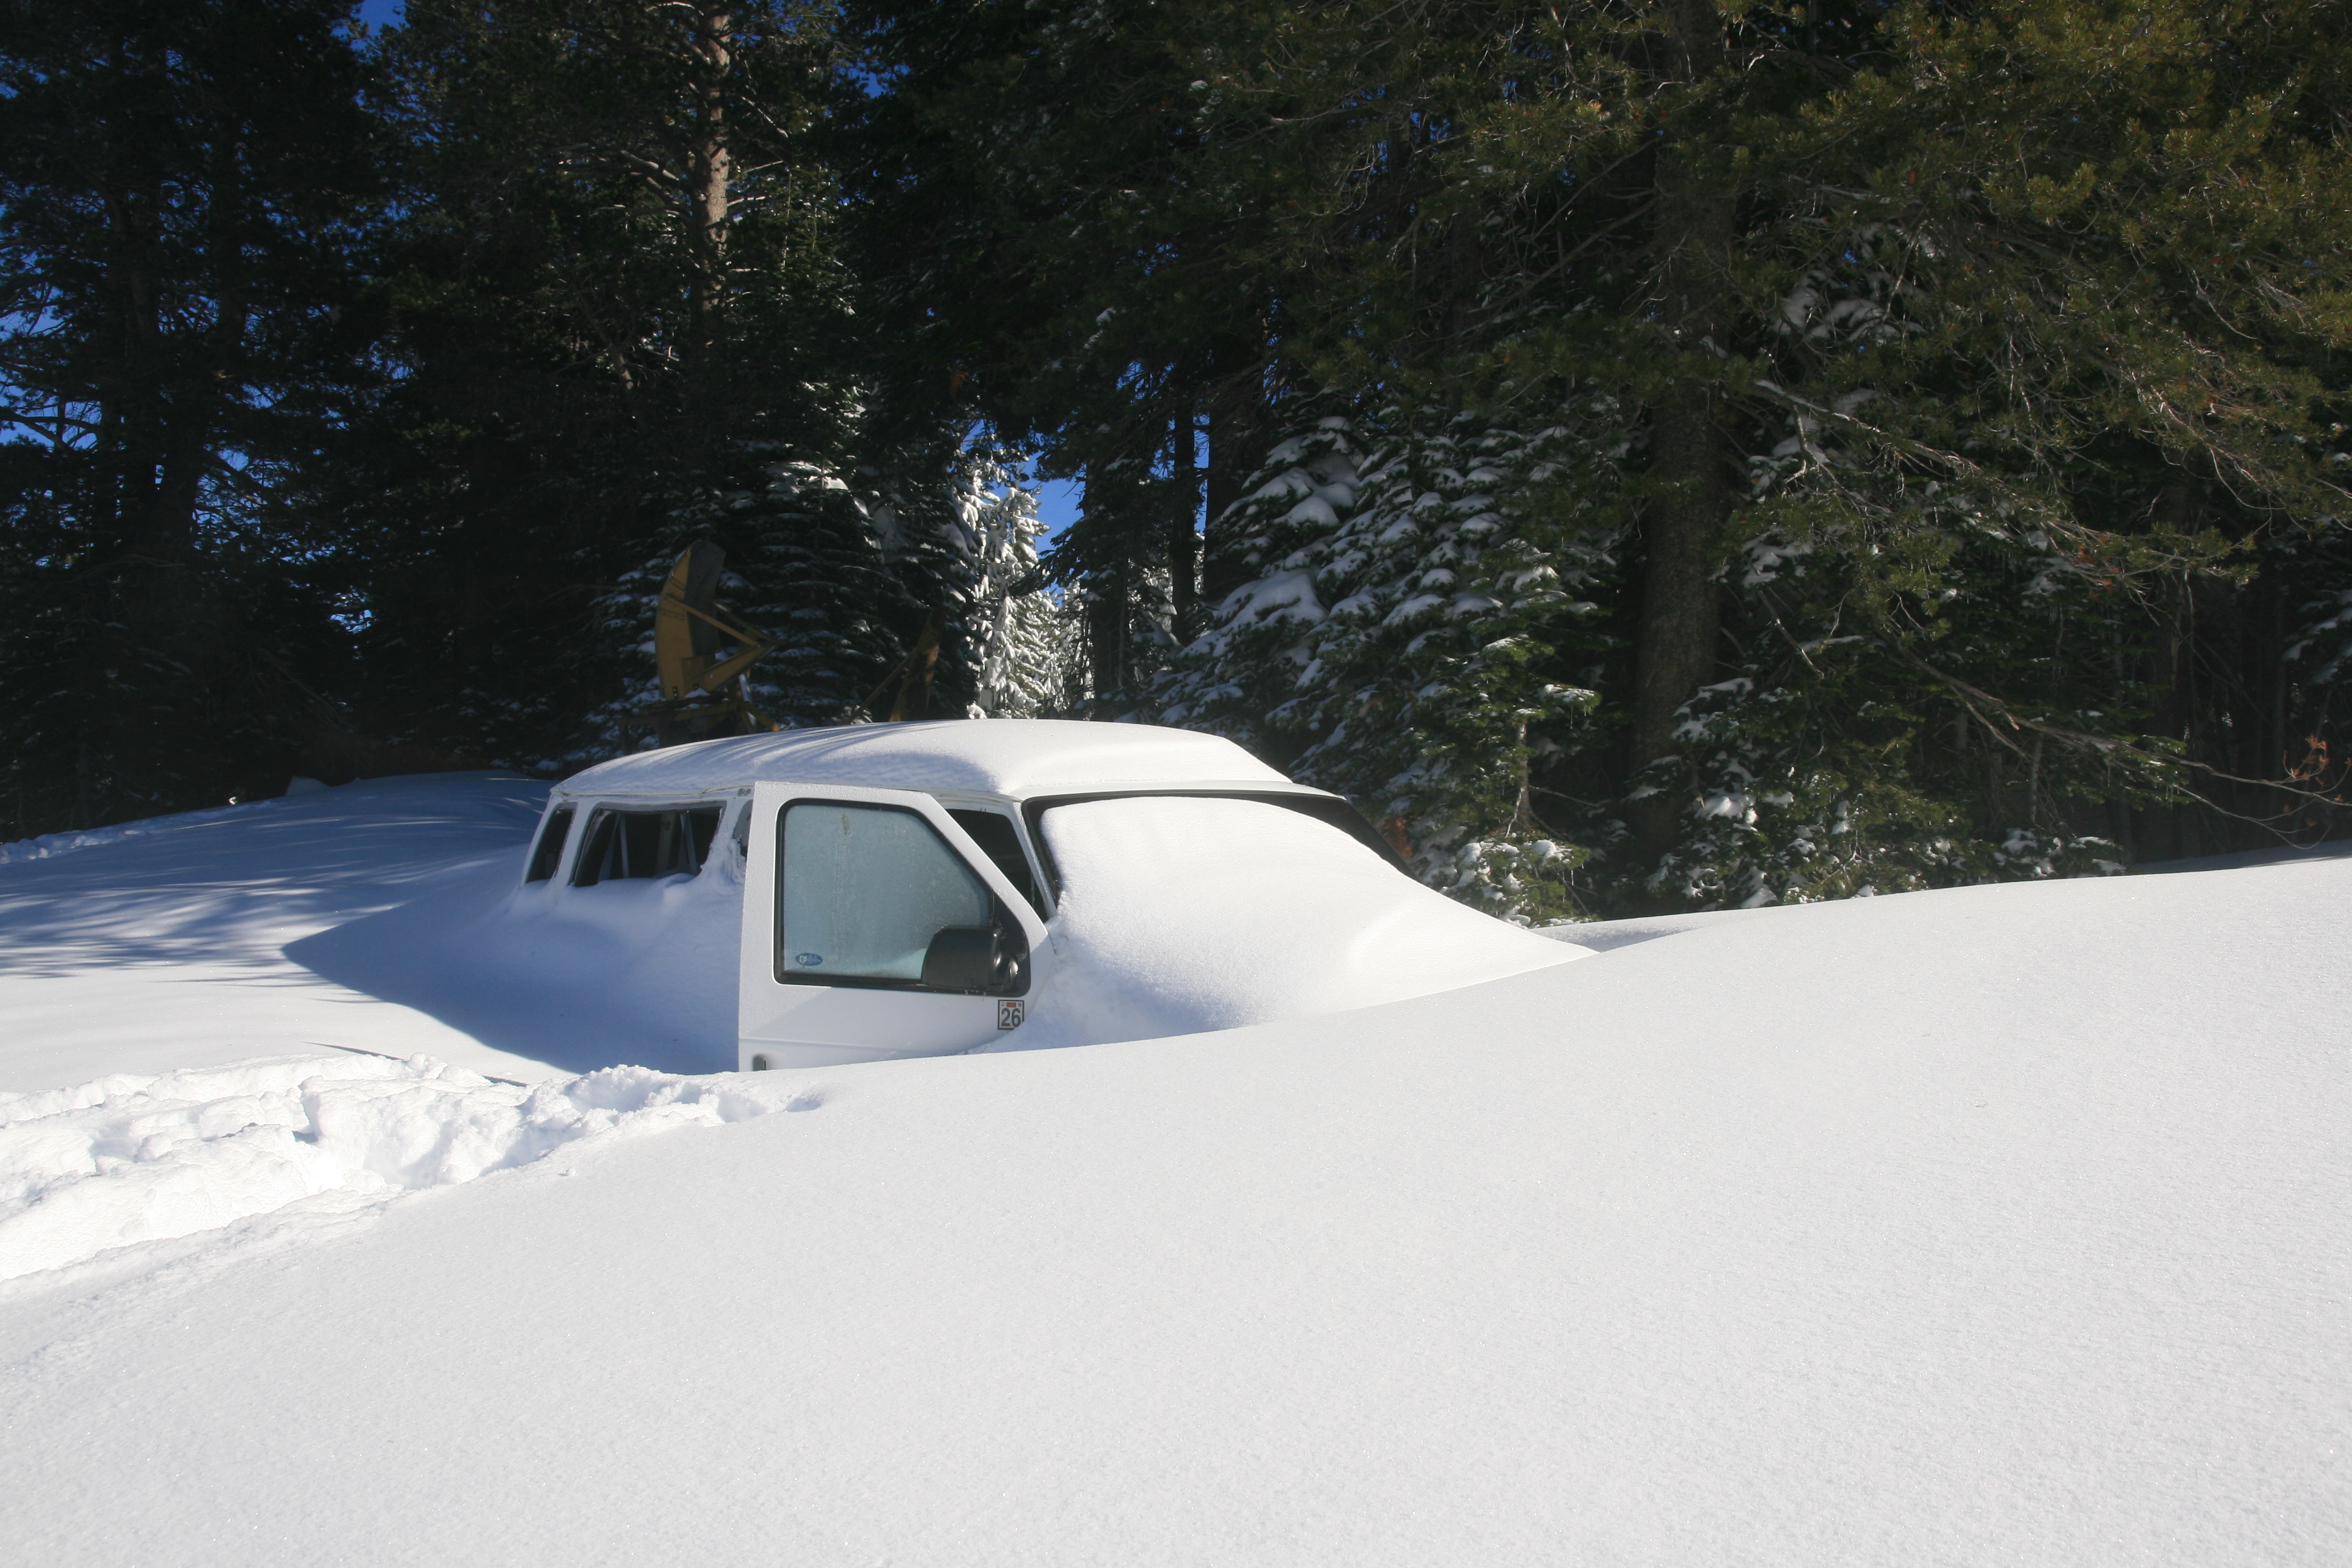 Van covered by snow in Boreal California